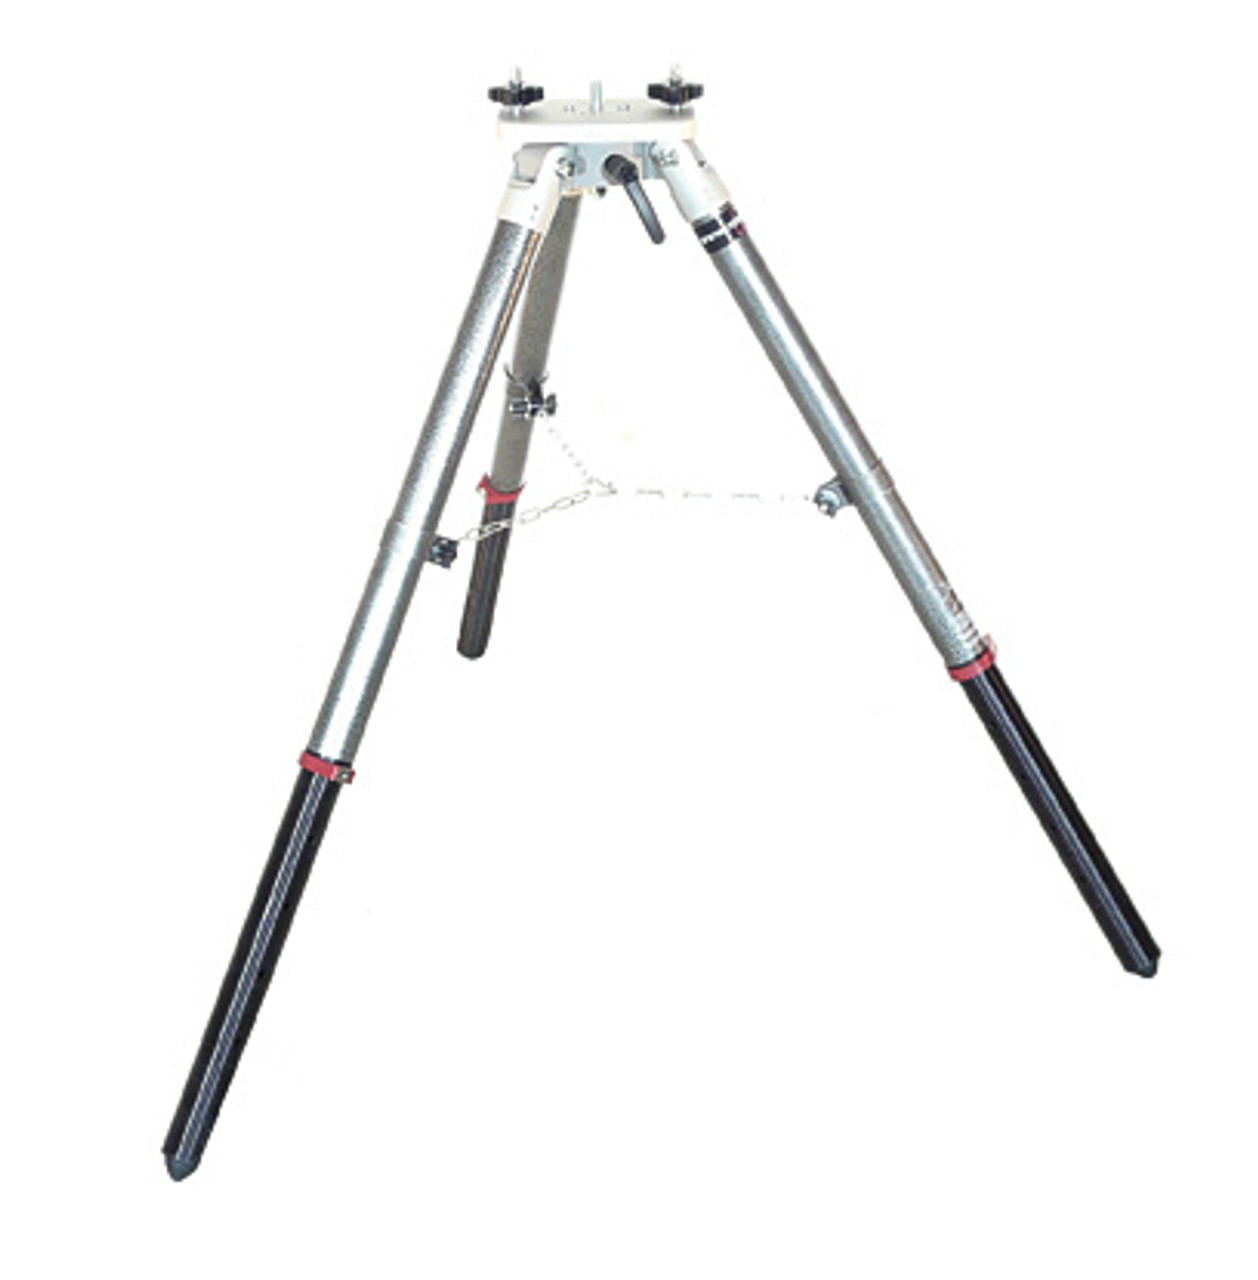 Robert Juliat GT4000 Tripod Stand With Chain